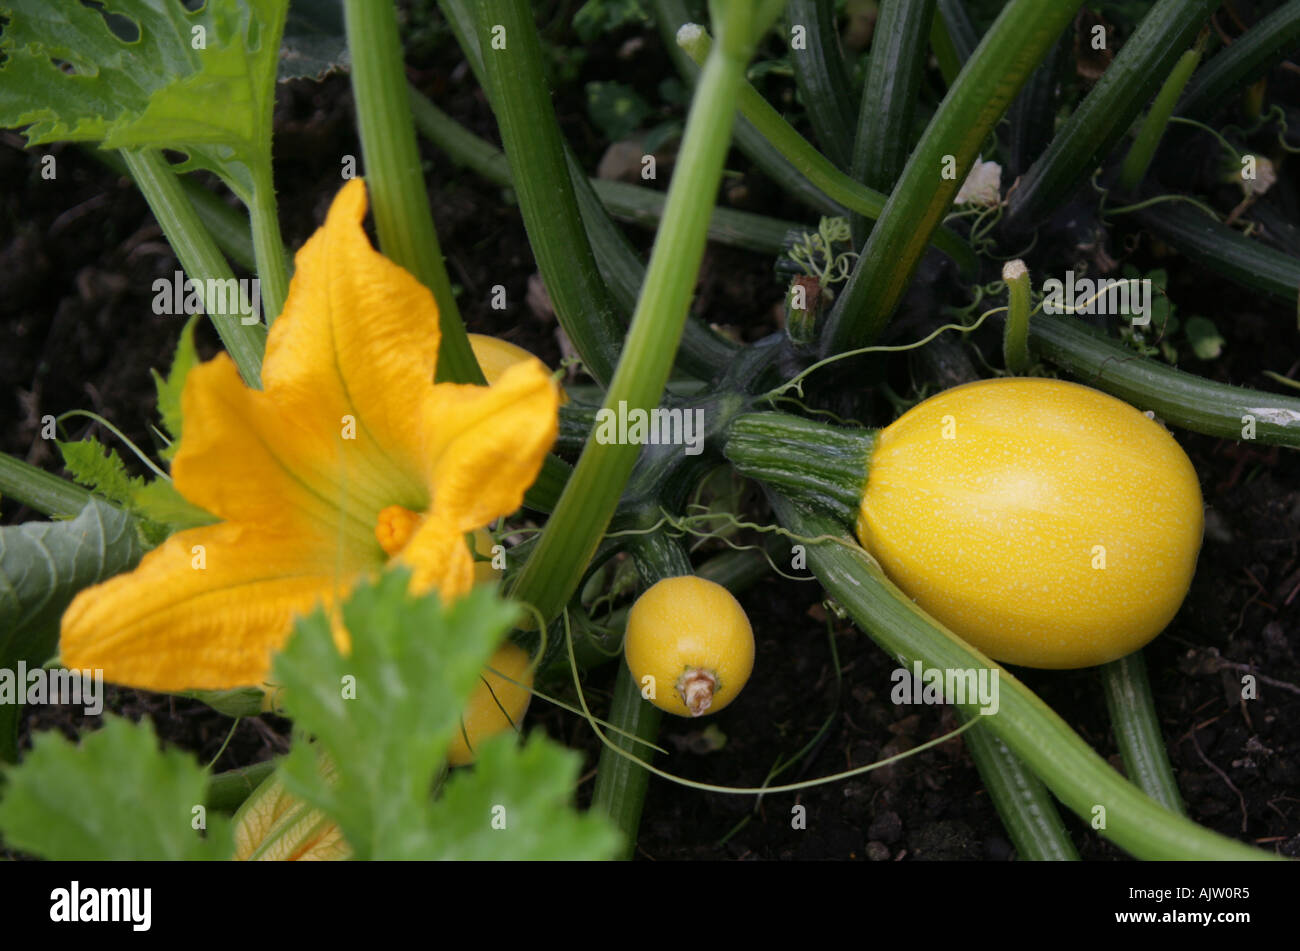 Courgette Floridor Growing In Klaus Laitenberger S Organic